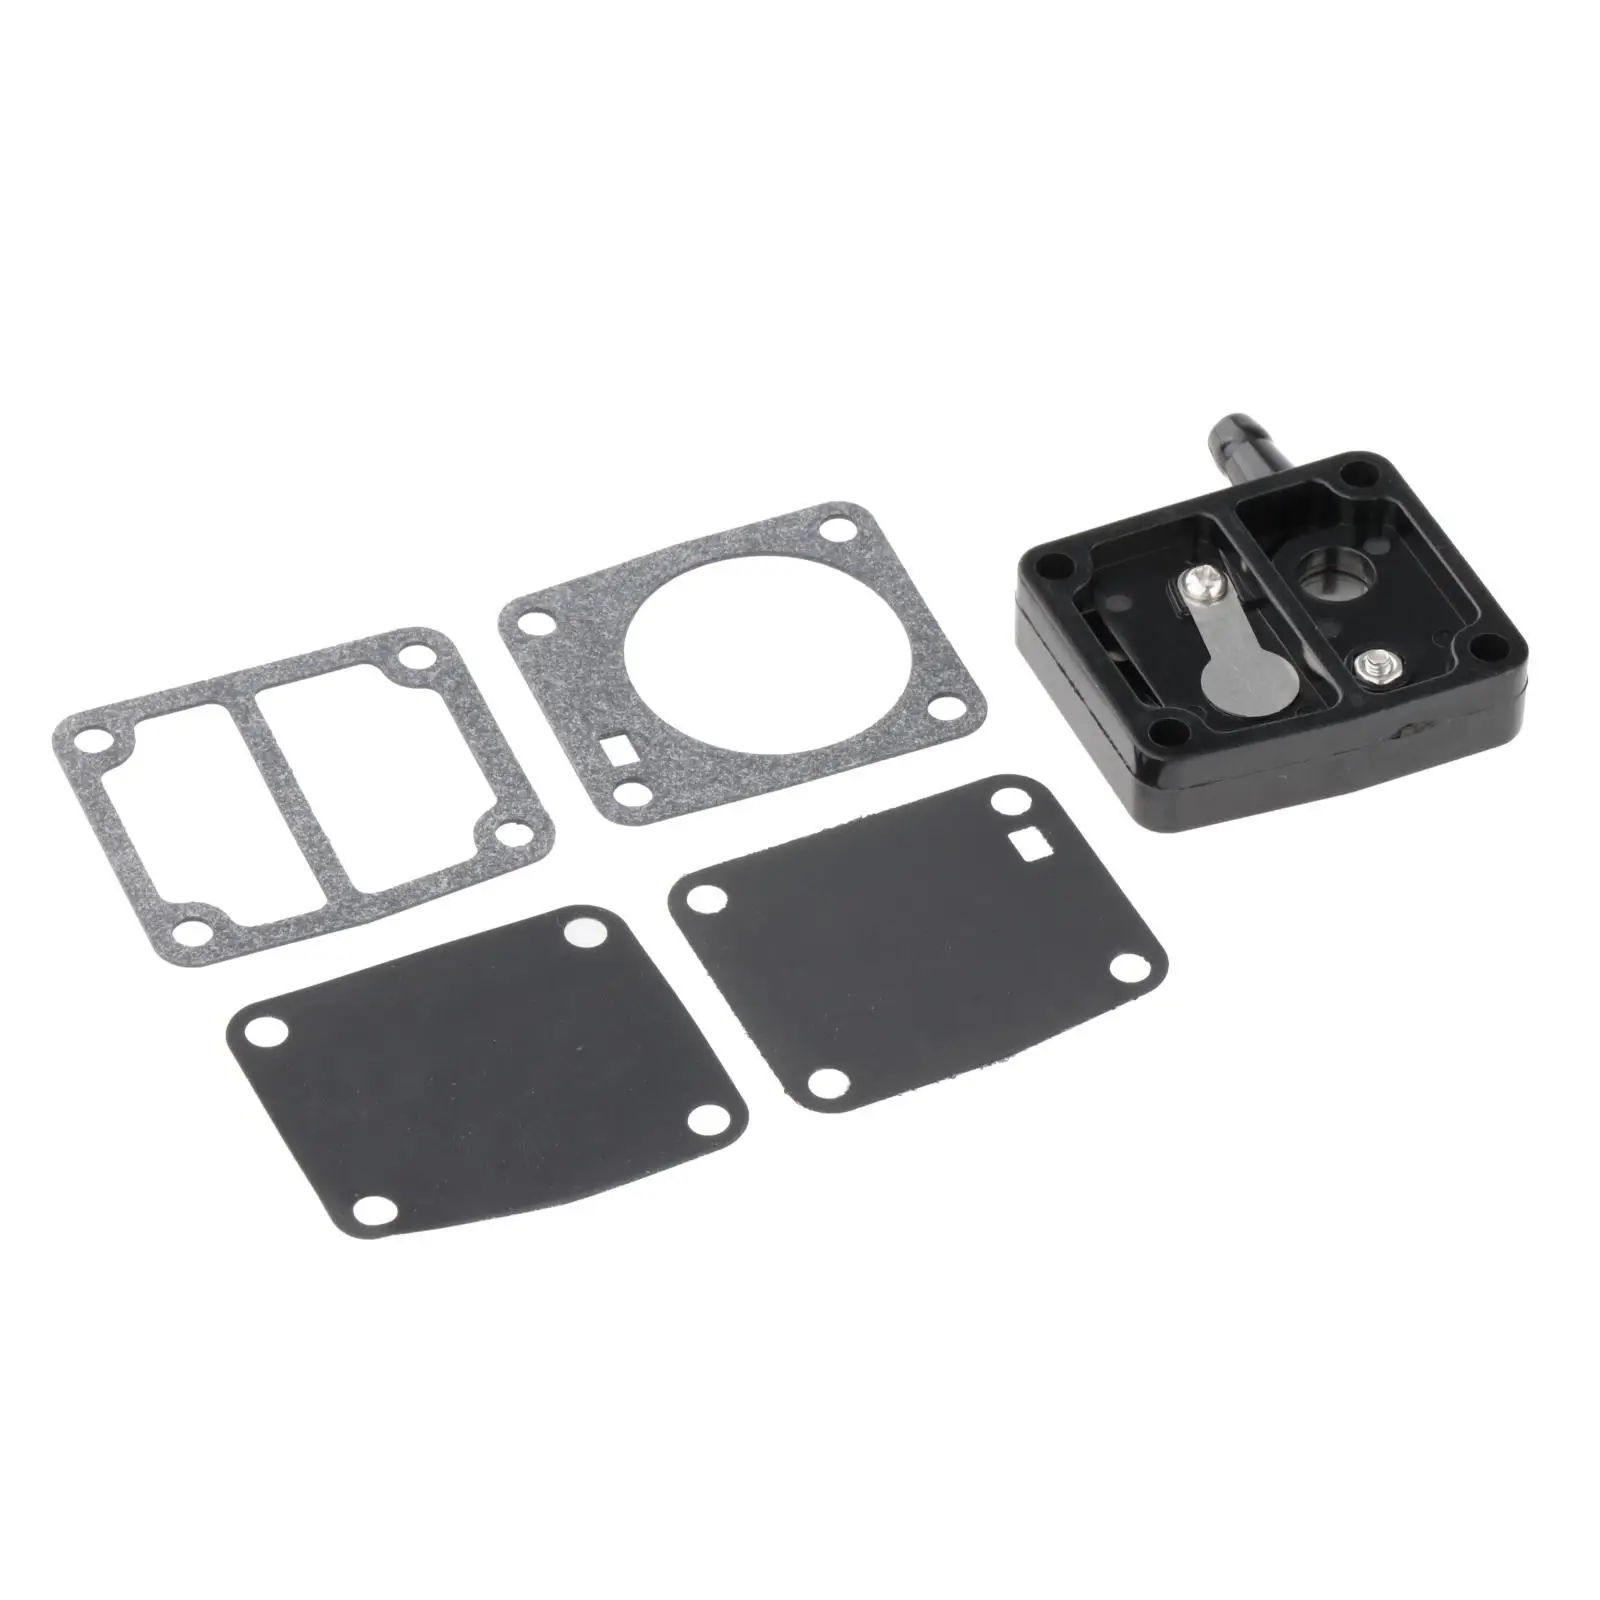 Carburetor Fuel Gasket Kit Accessories Direct Replaces Fit for Yamaha 9.9HP 15HP 6G1-24432